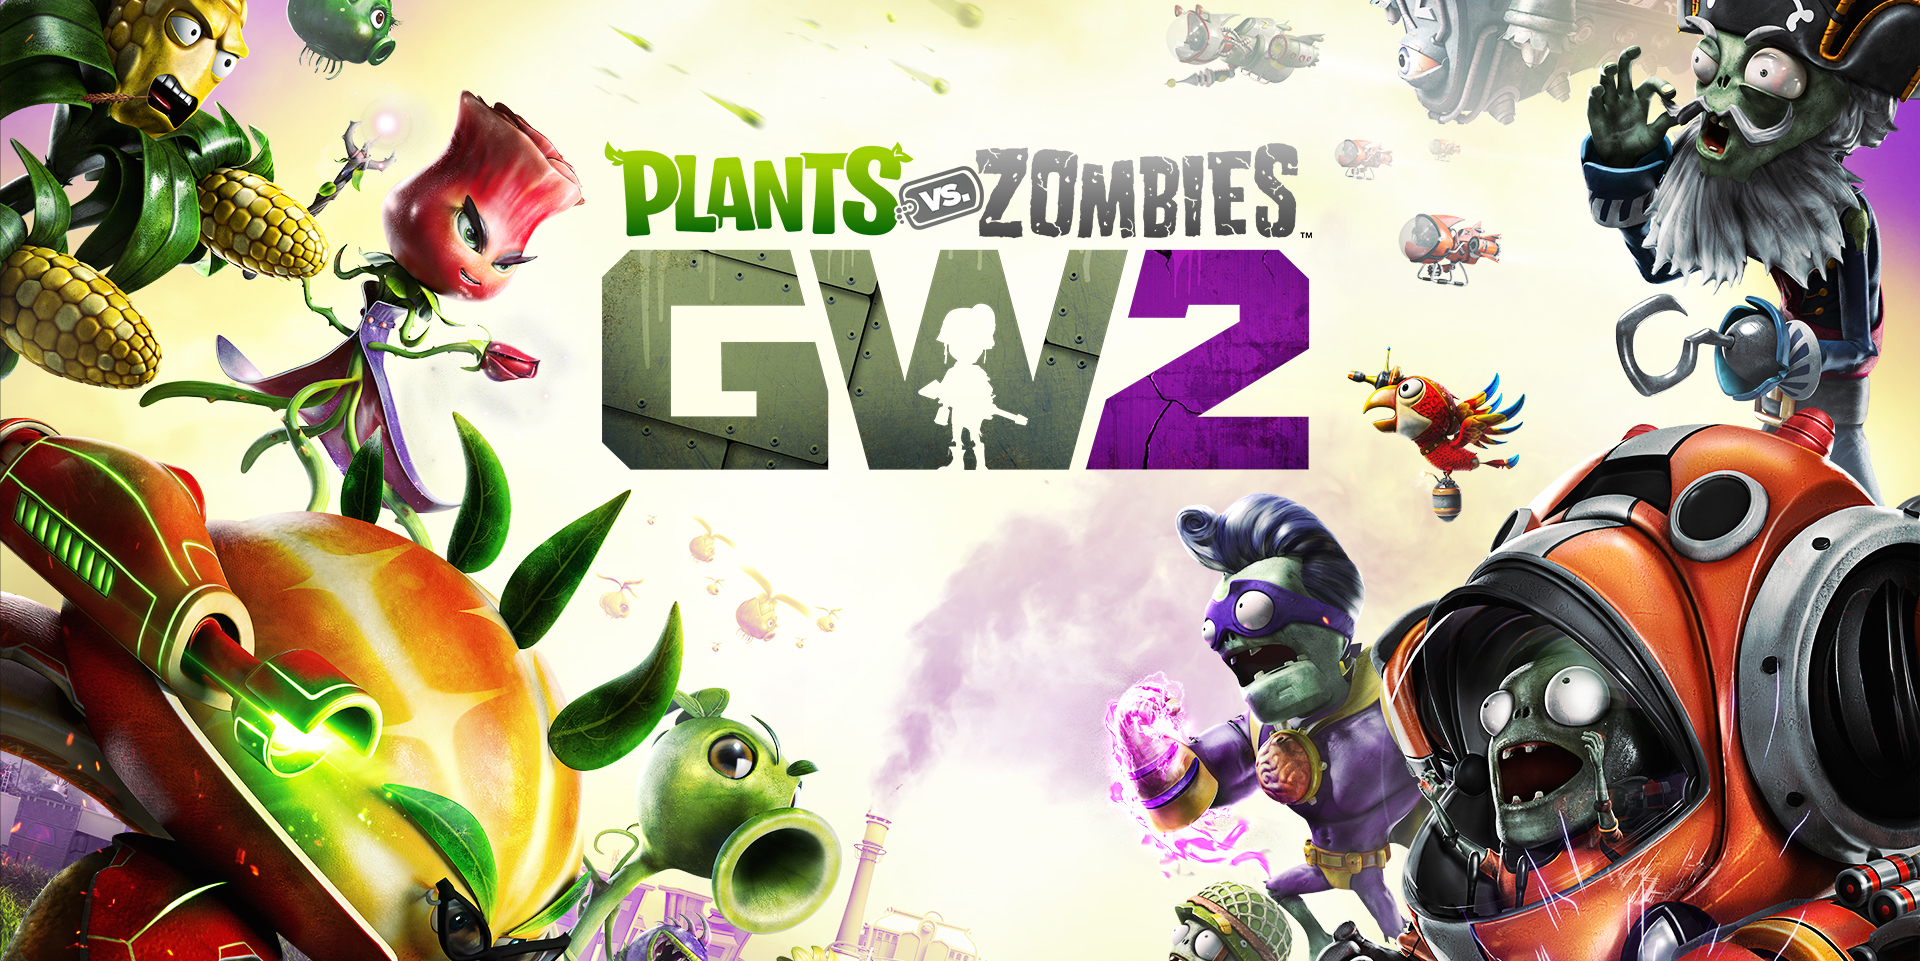 Plants Vs Zombies Garden Warfare 2 Mobile - Download & Play on Android & iOS